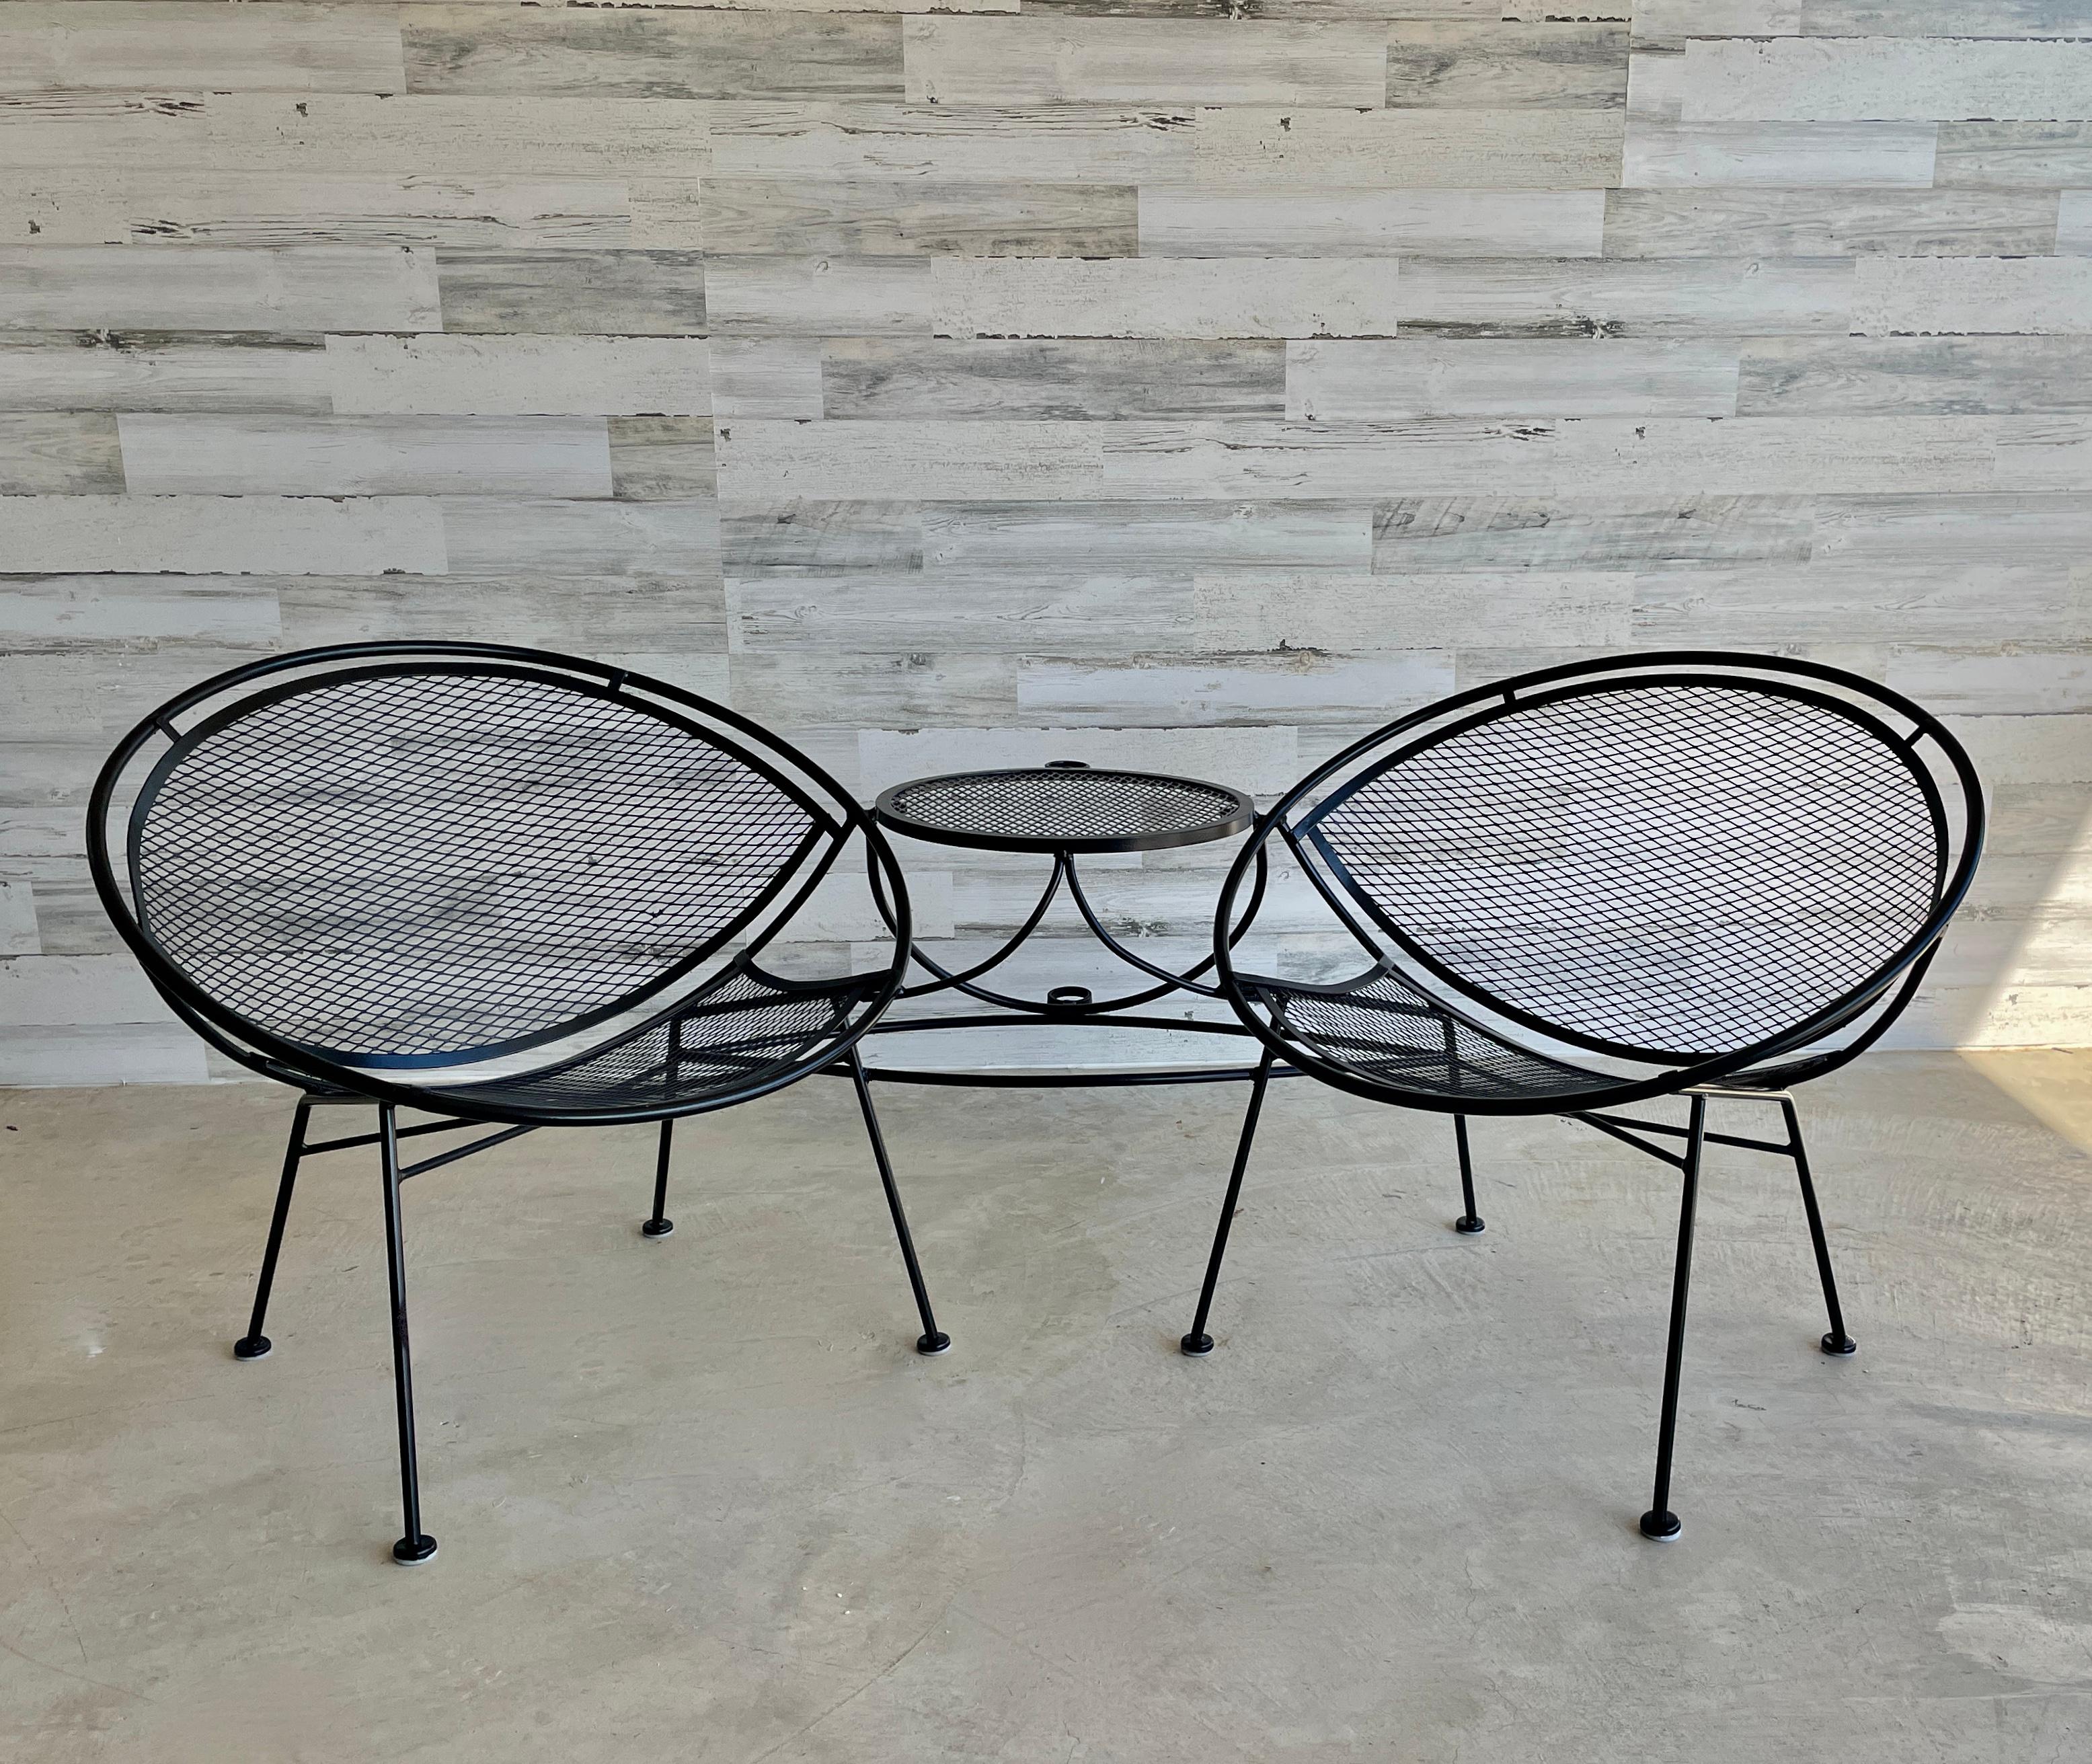 Vintage 1950s wrought iron 'tête-à-tête'. Designed by Maurizio Tempestini for Salterini. The two lounge chairs are connected by a table between, which also incorporates an umbrella holder.